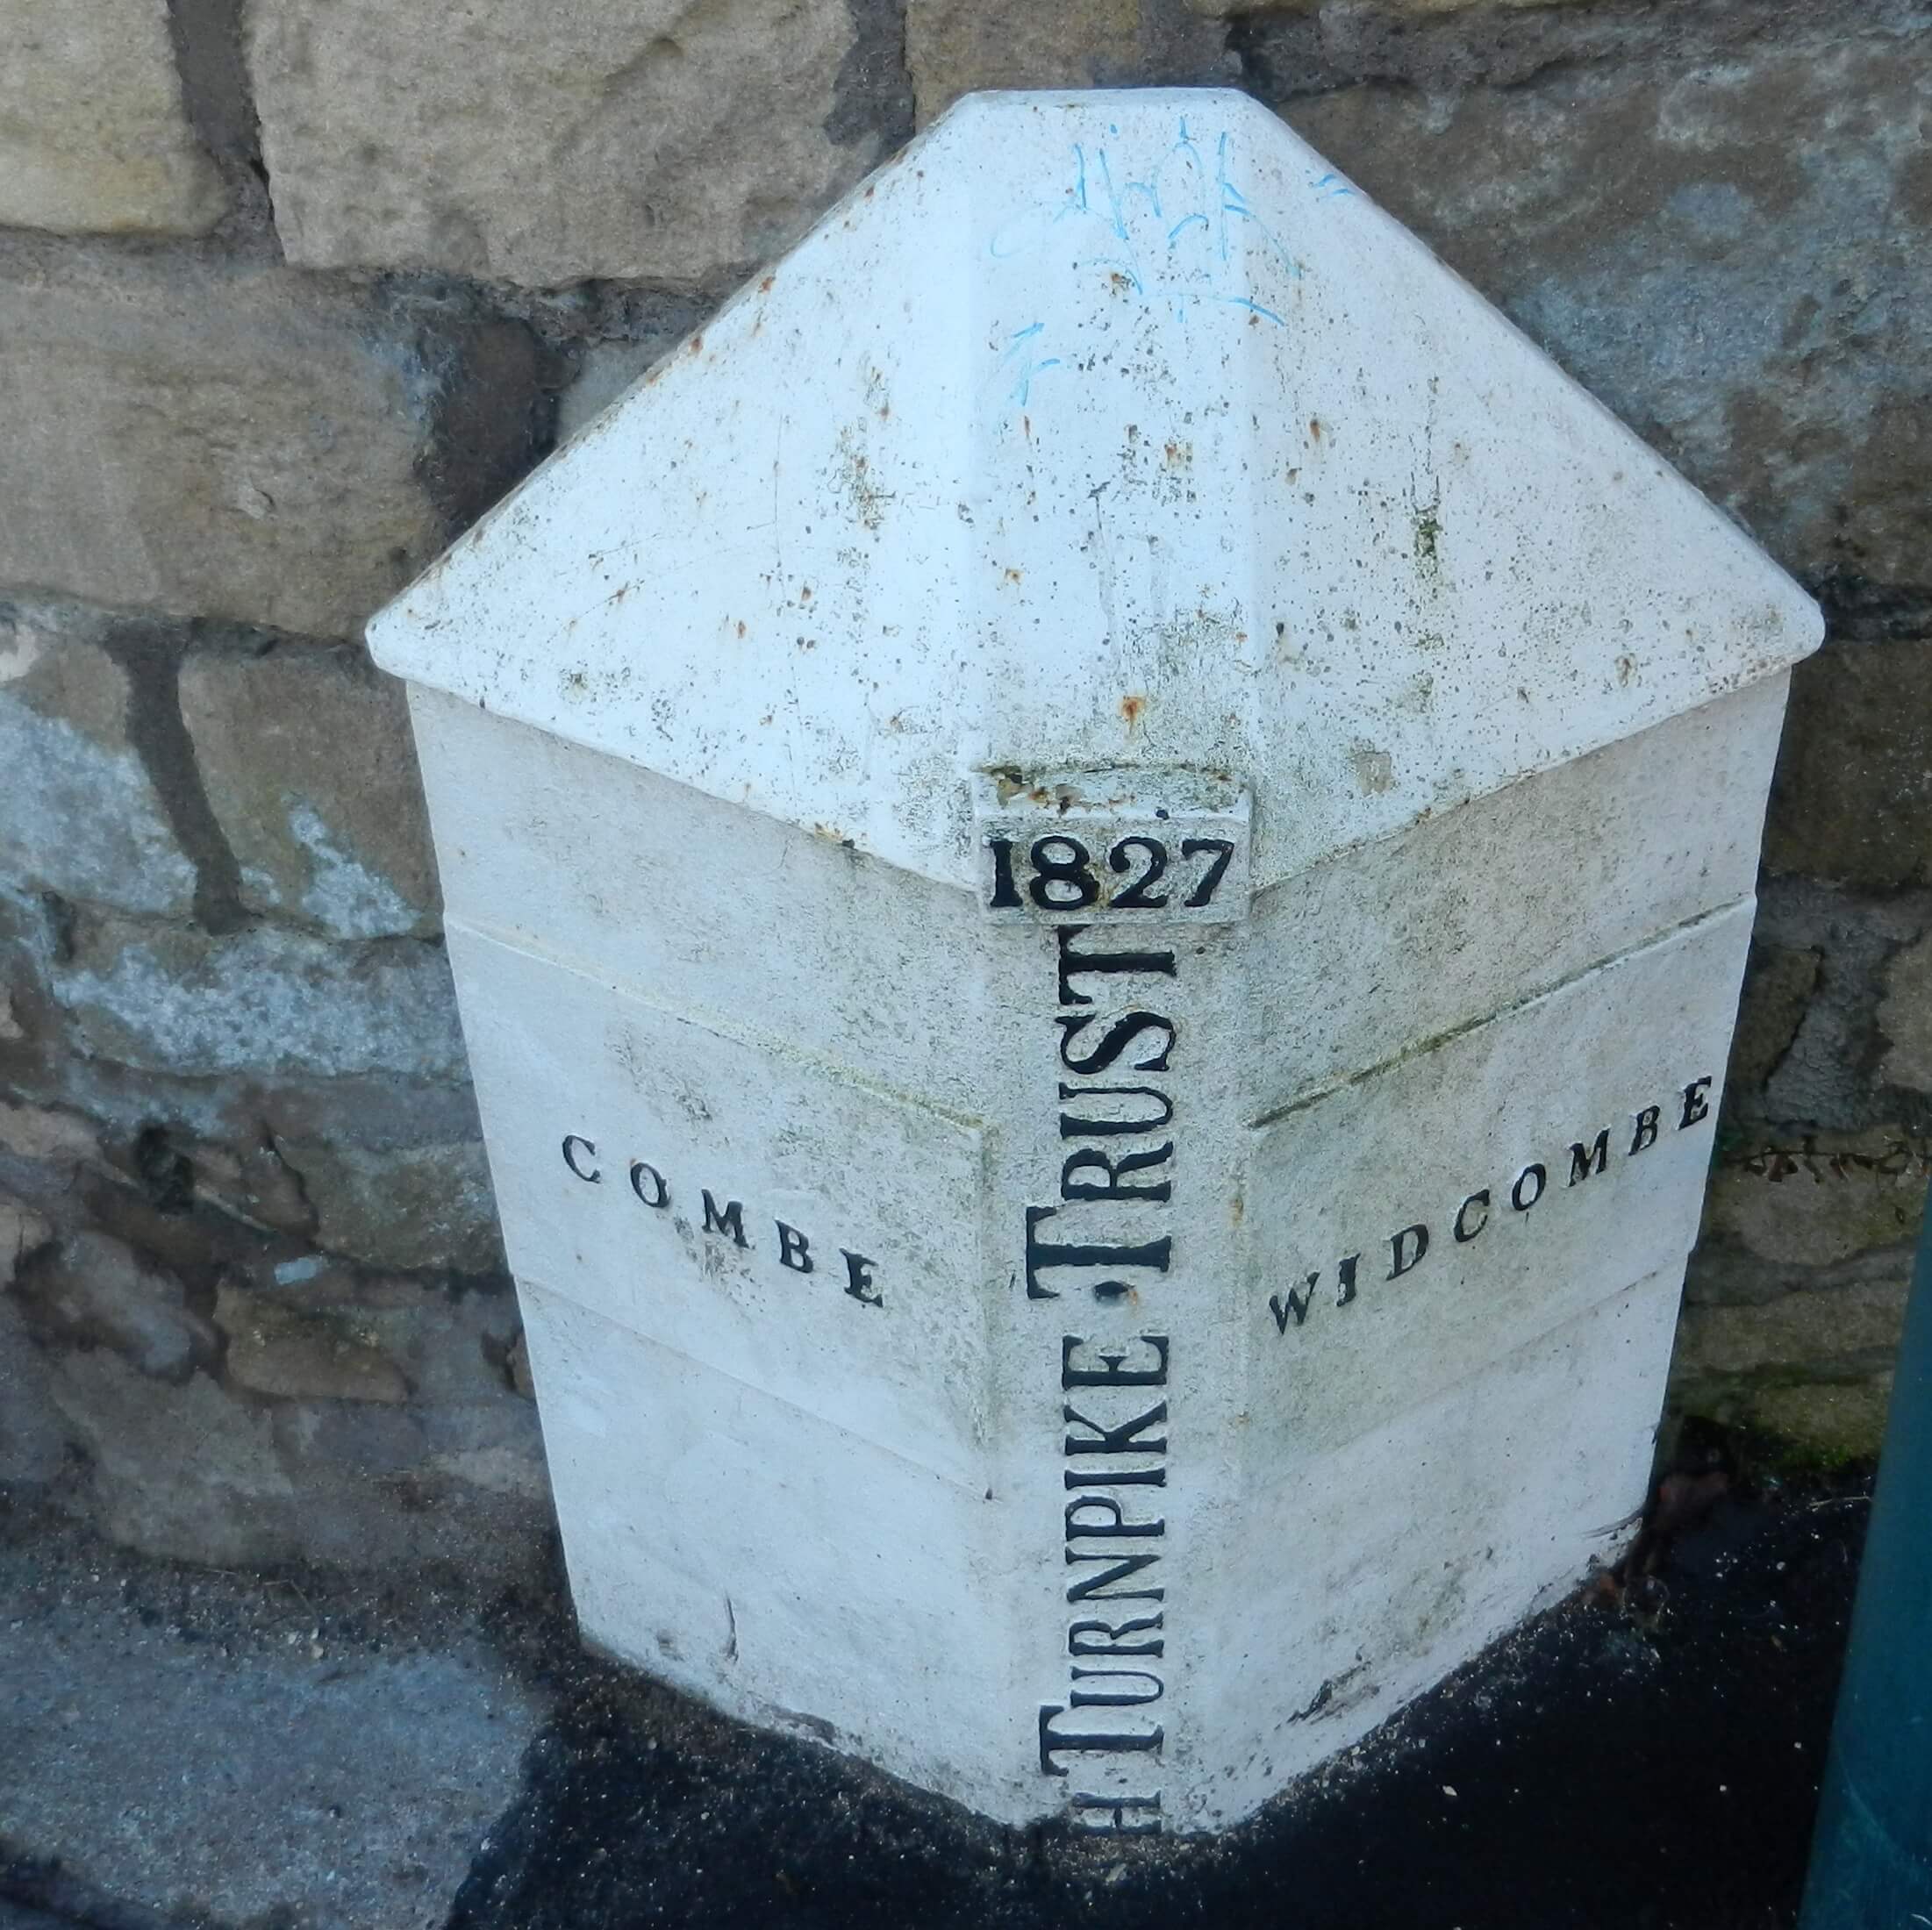 Turnpike marker on Combe Road